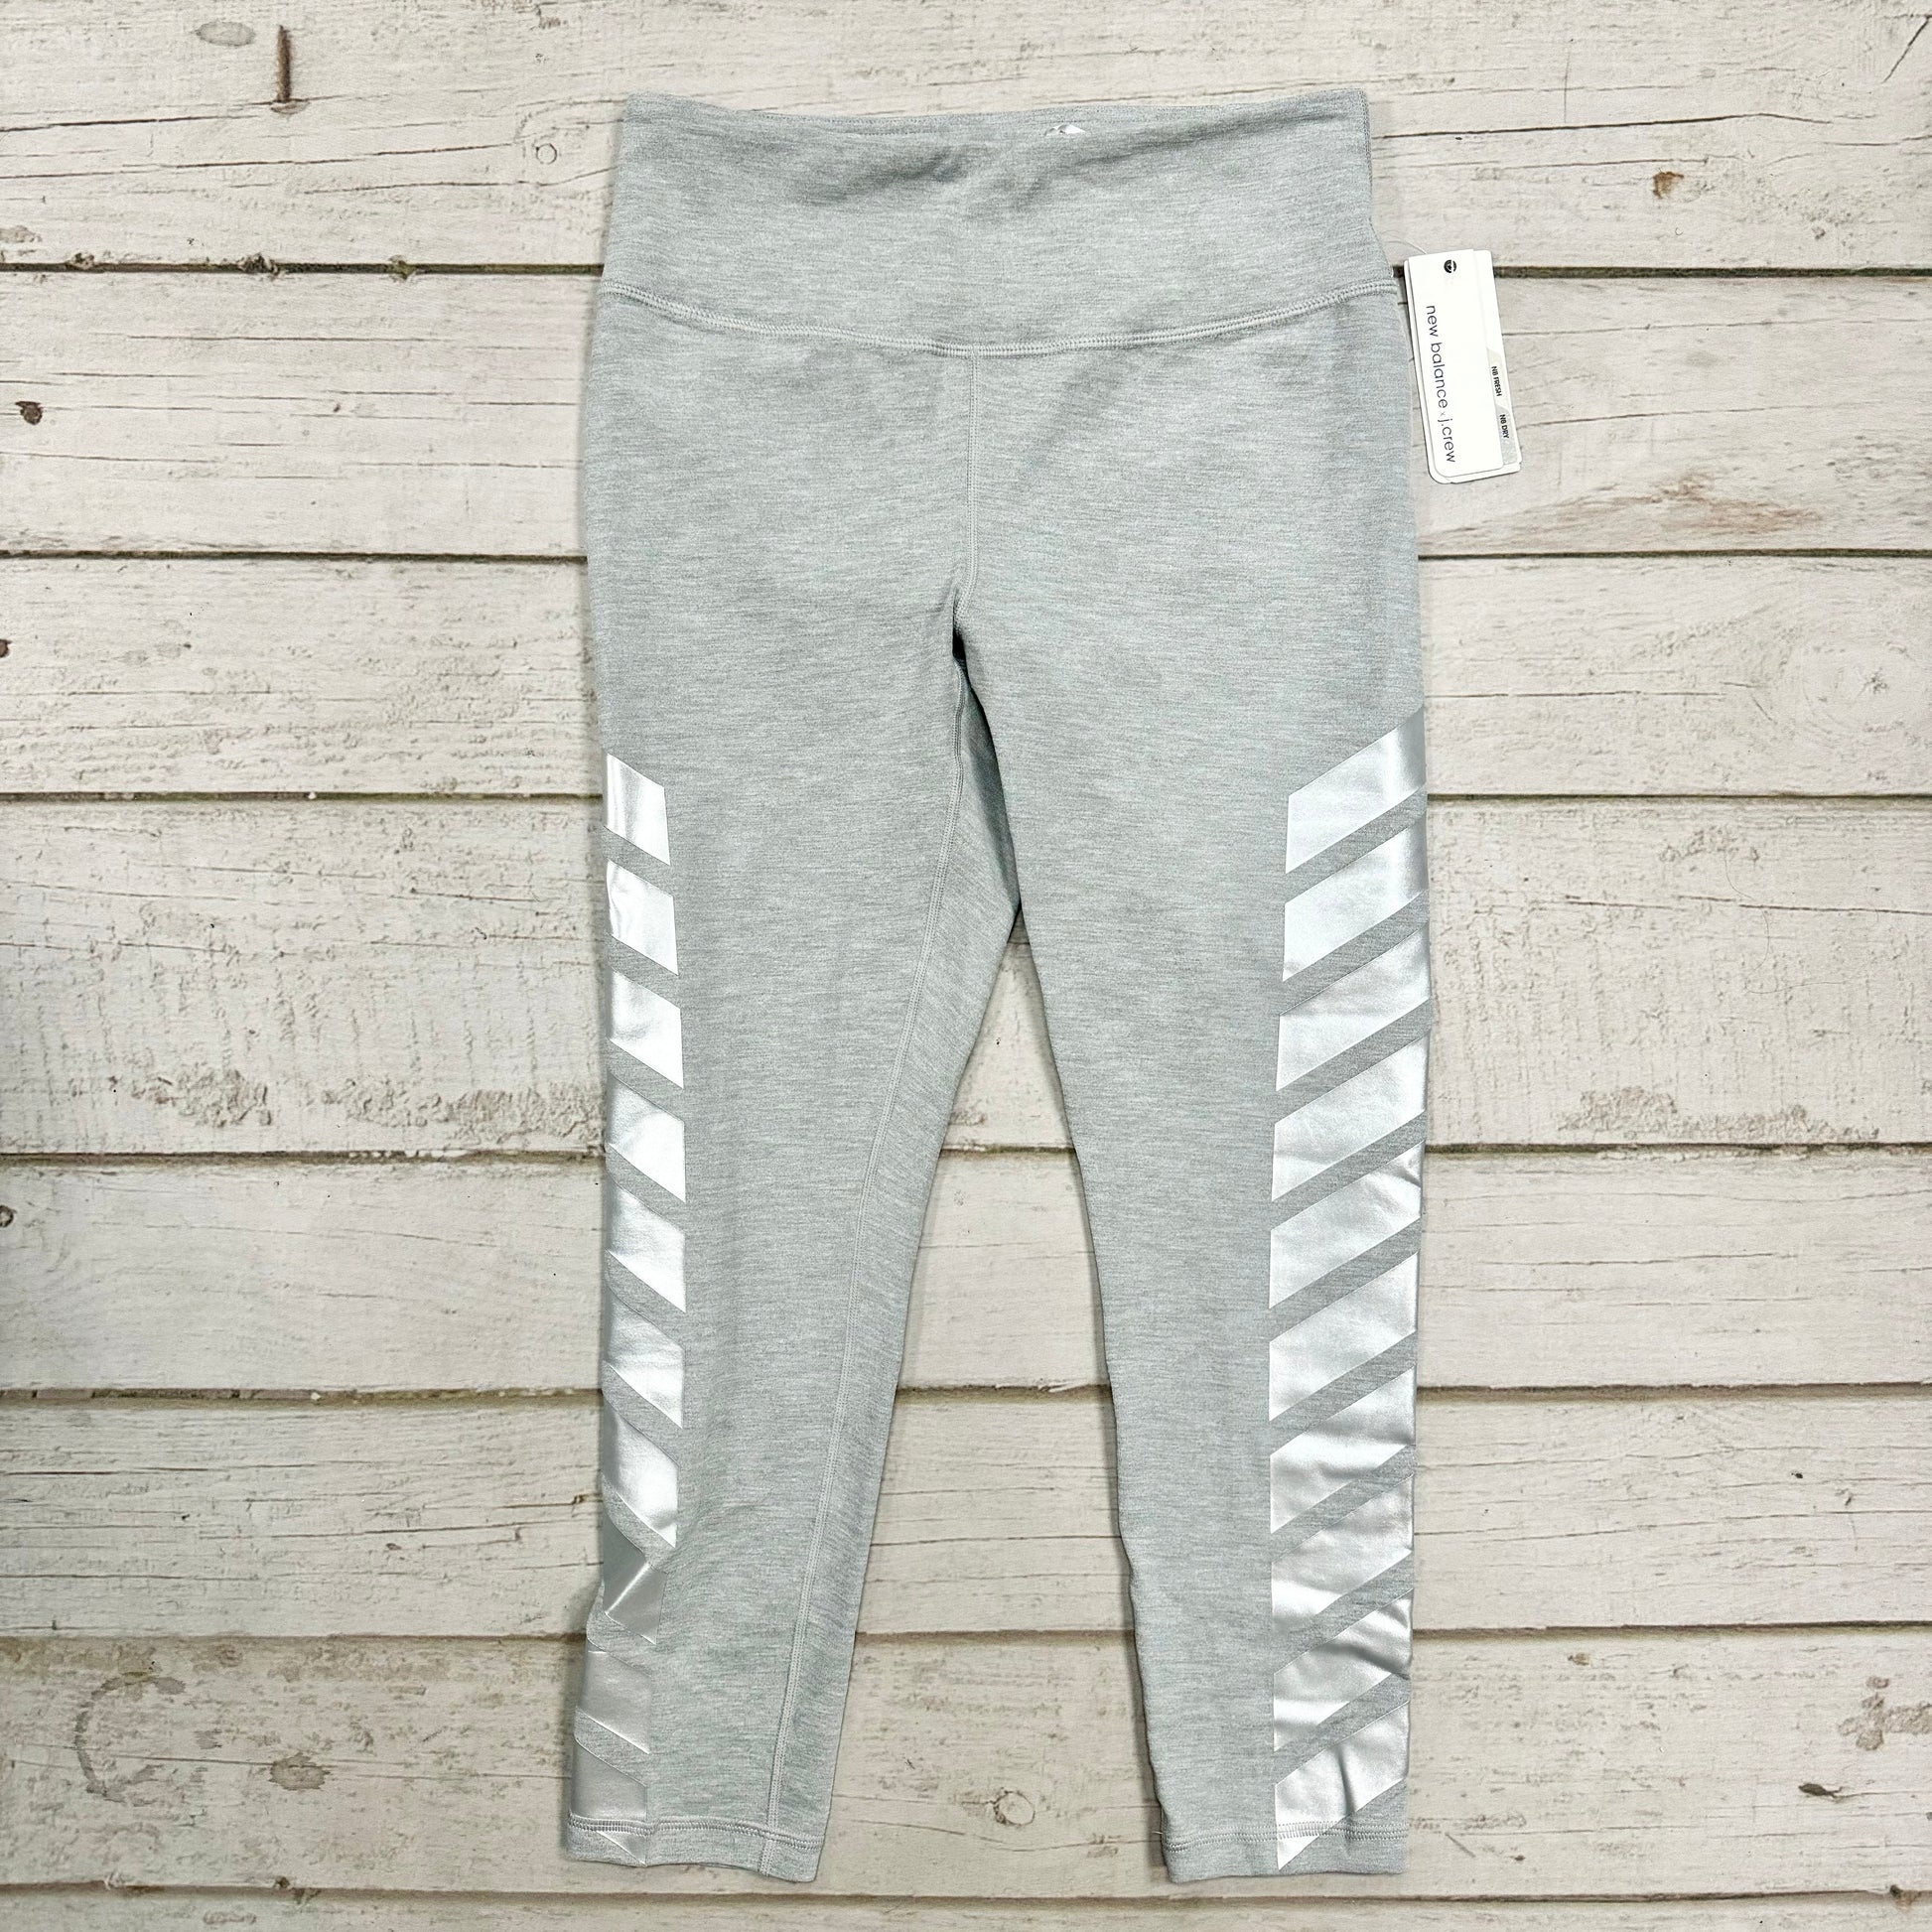 Athletic Leggings By New Balance Size: M